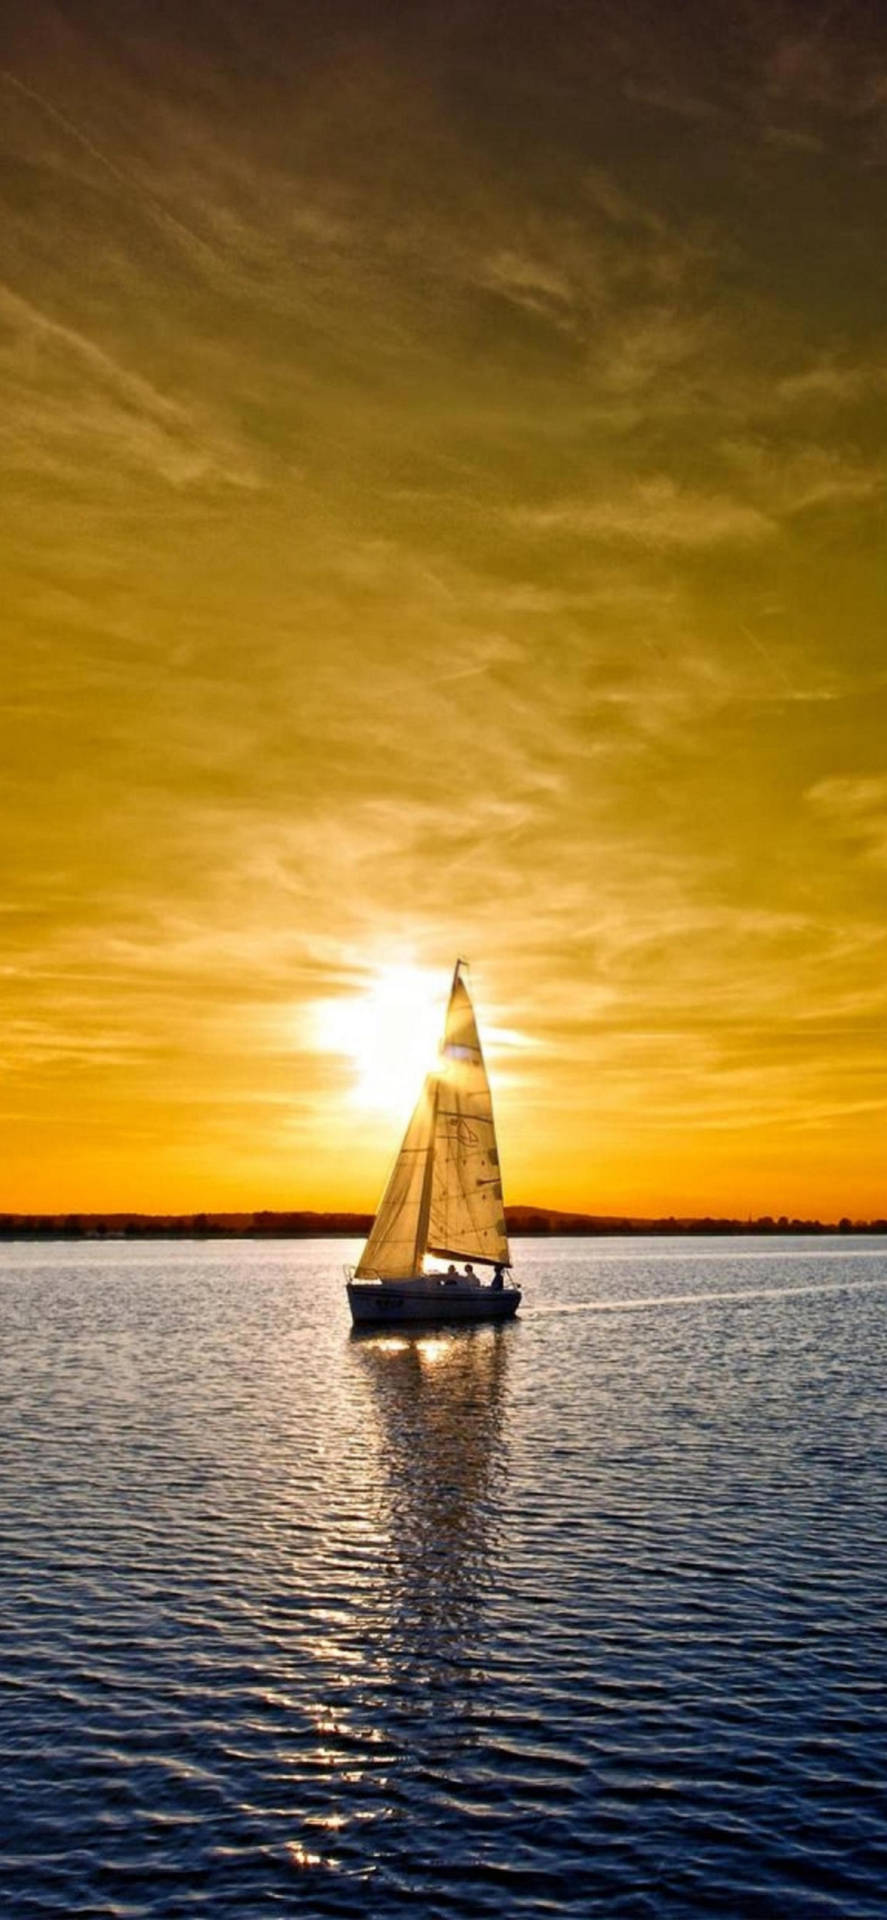 Iphone 13 Pro Max Sailboat Background